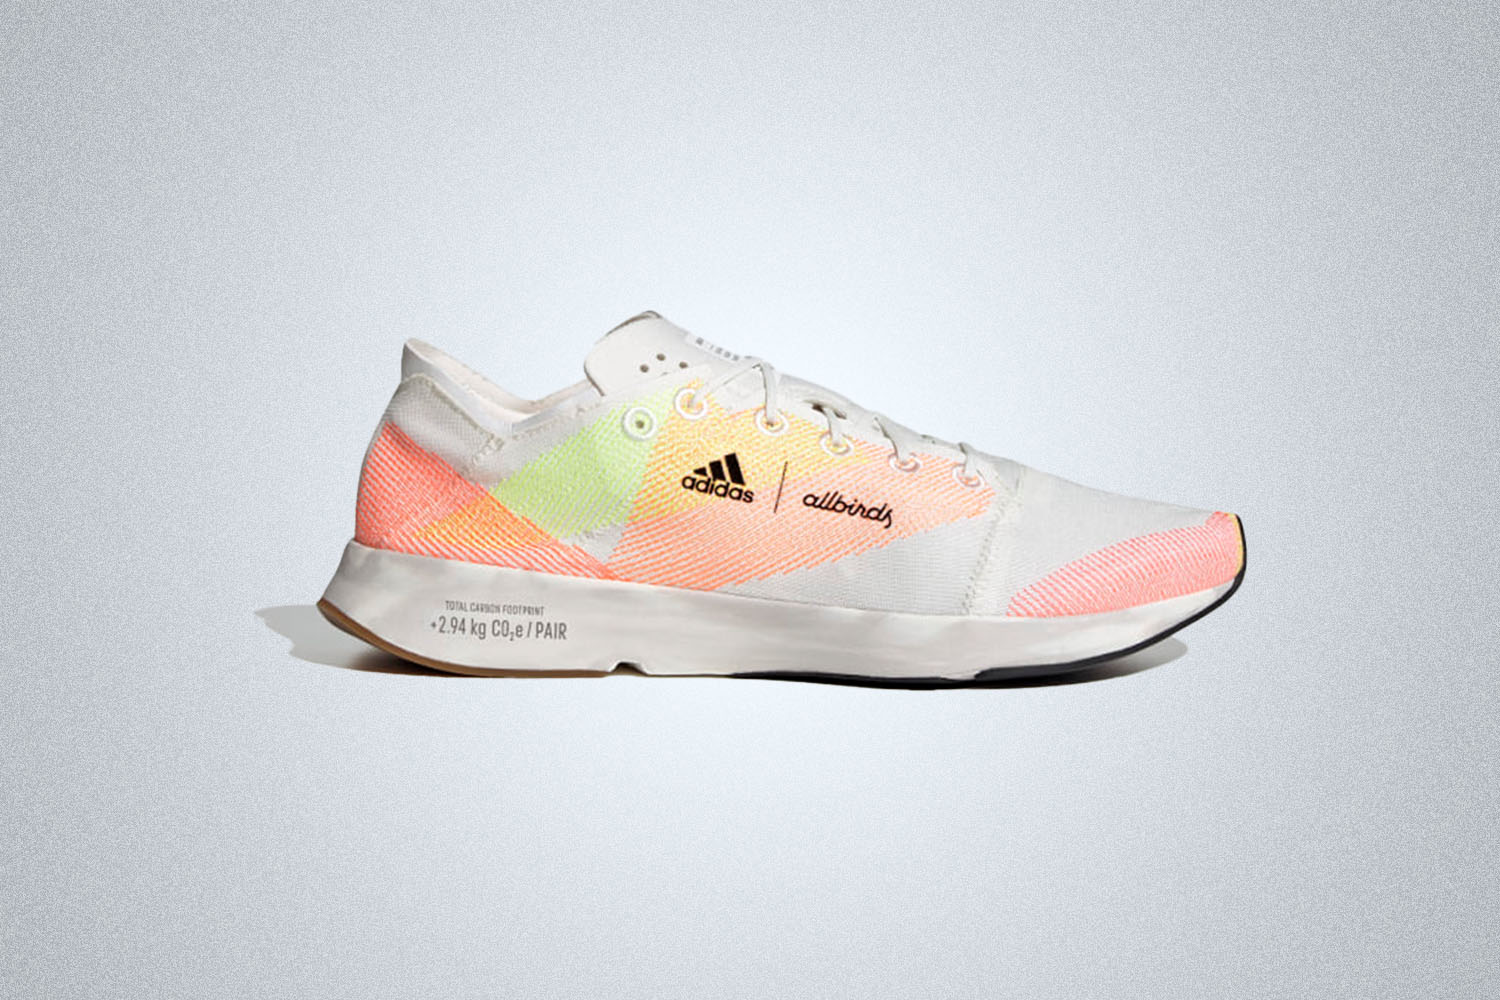 a white Adidas sneaker with pink, orange and yellow patterns on a gray background